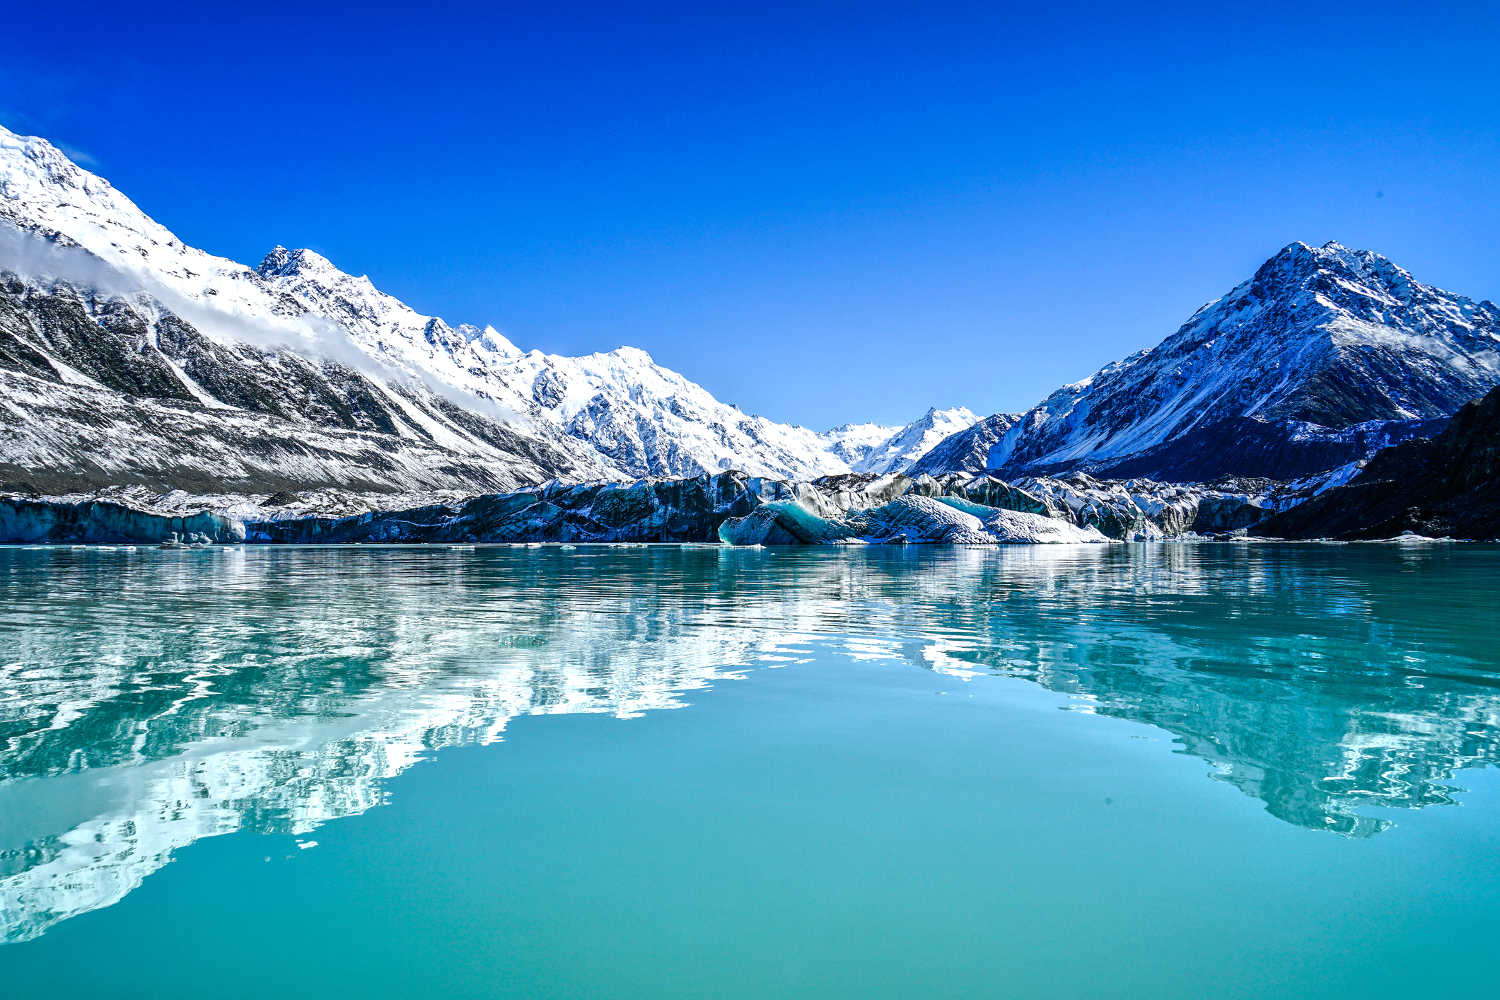 Turquoise Blue Icebergs with A Water Reflection on Tasman Glacier Terminal Lake, New Zealand